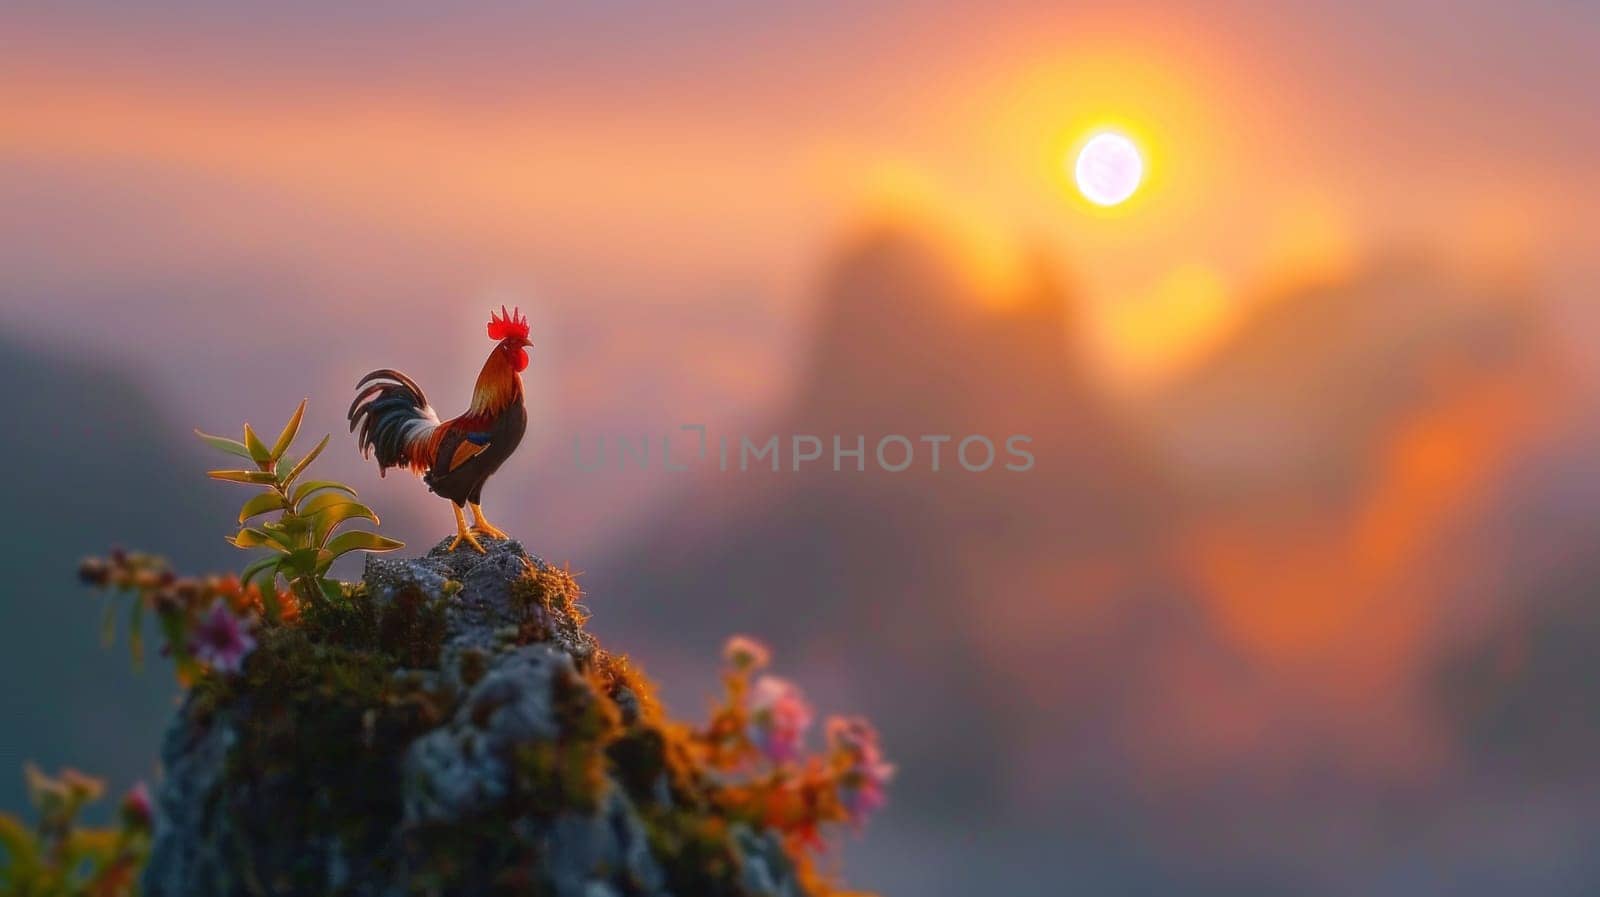 Rooster Standing on Mountain Peak at Sunrise with Exaggerated Features for Miniature Diorama Concept Magical and Whimsical Atmosphere.